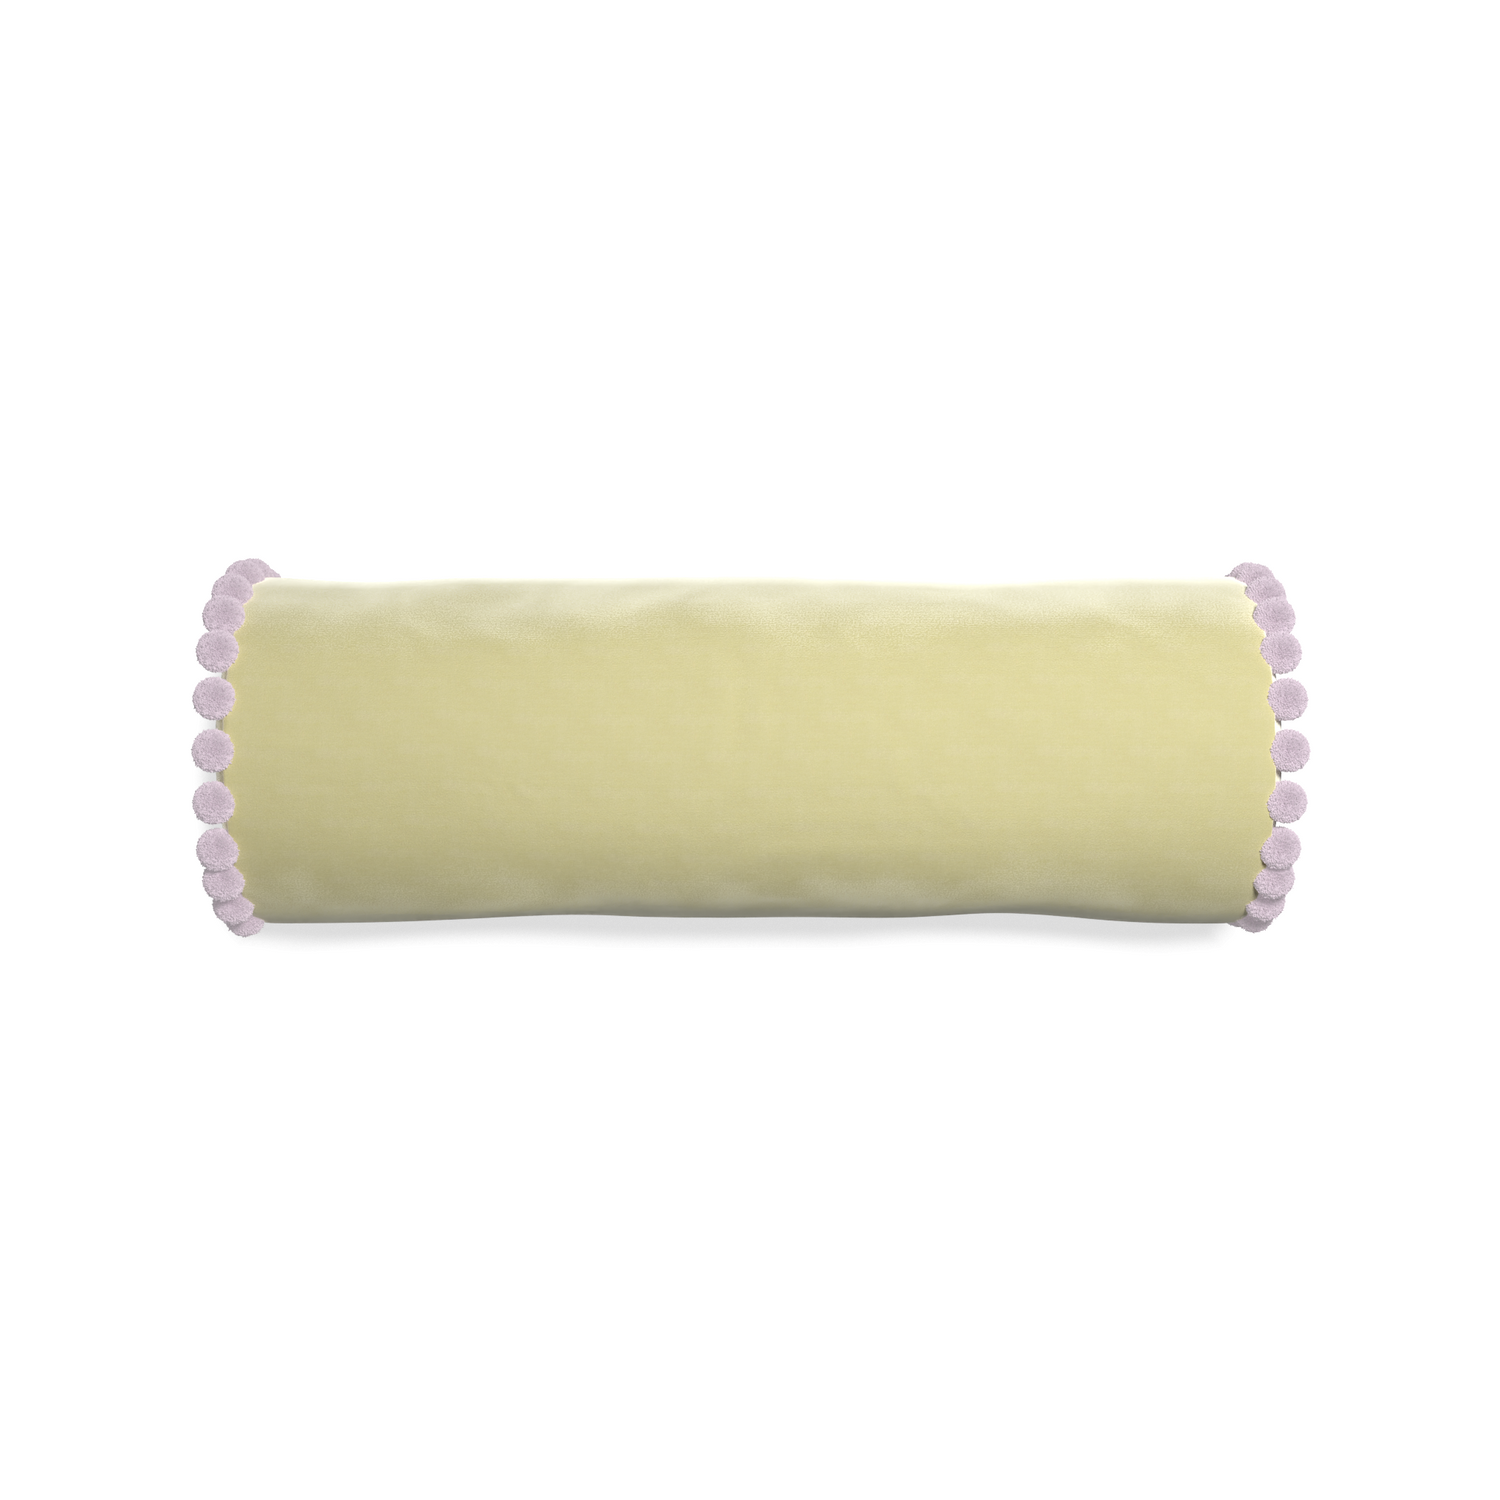 bolster light green pillow with lilac pom poms